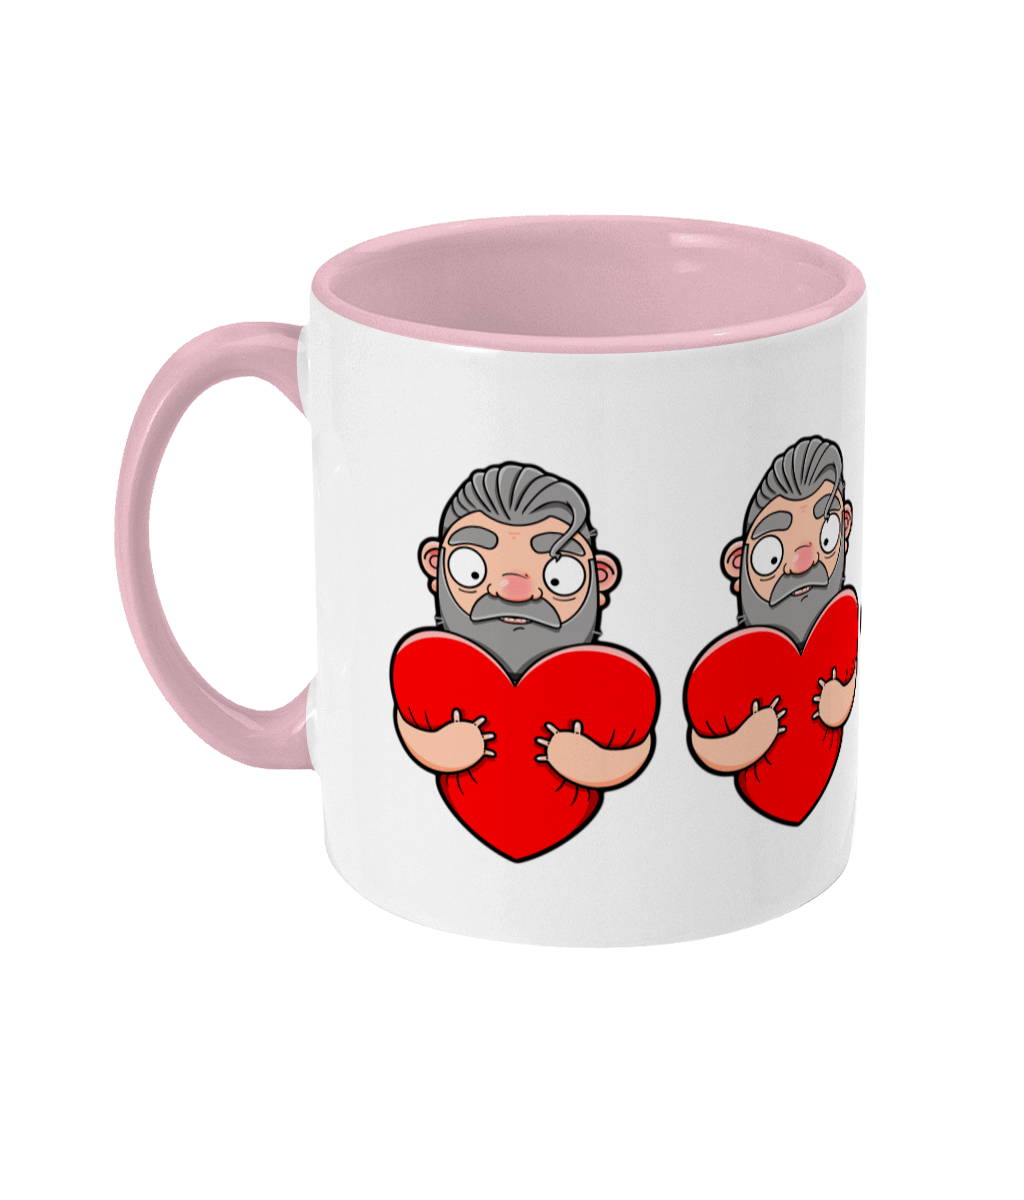 Fun design showcasing a silver haired gay daddy embracing a vibrant red heart and giving it a hug.